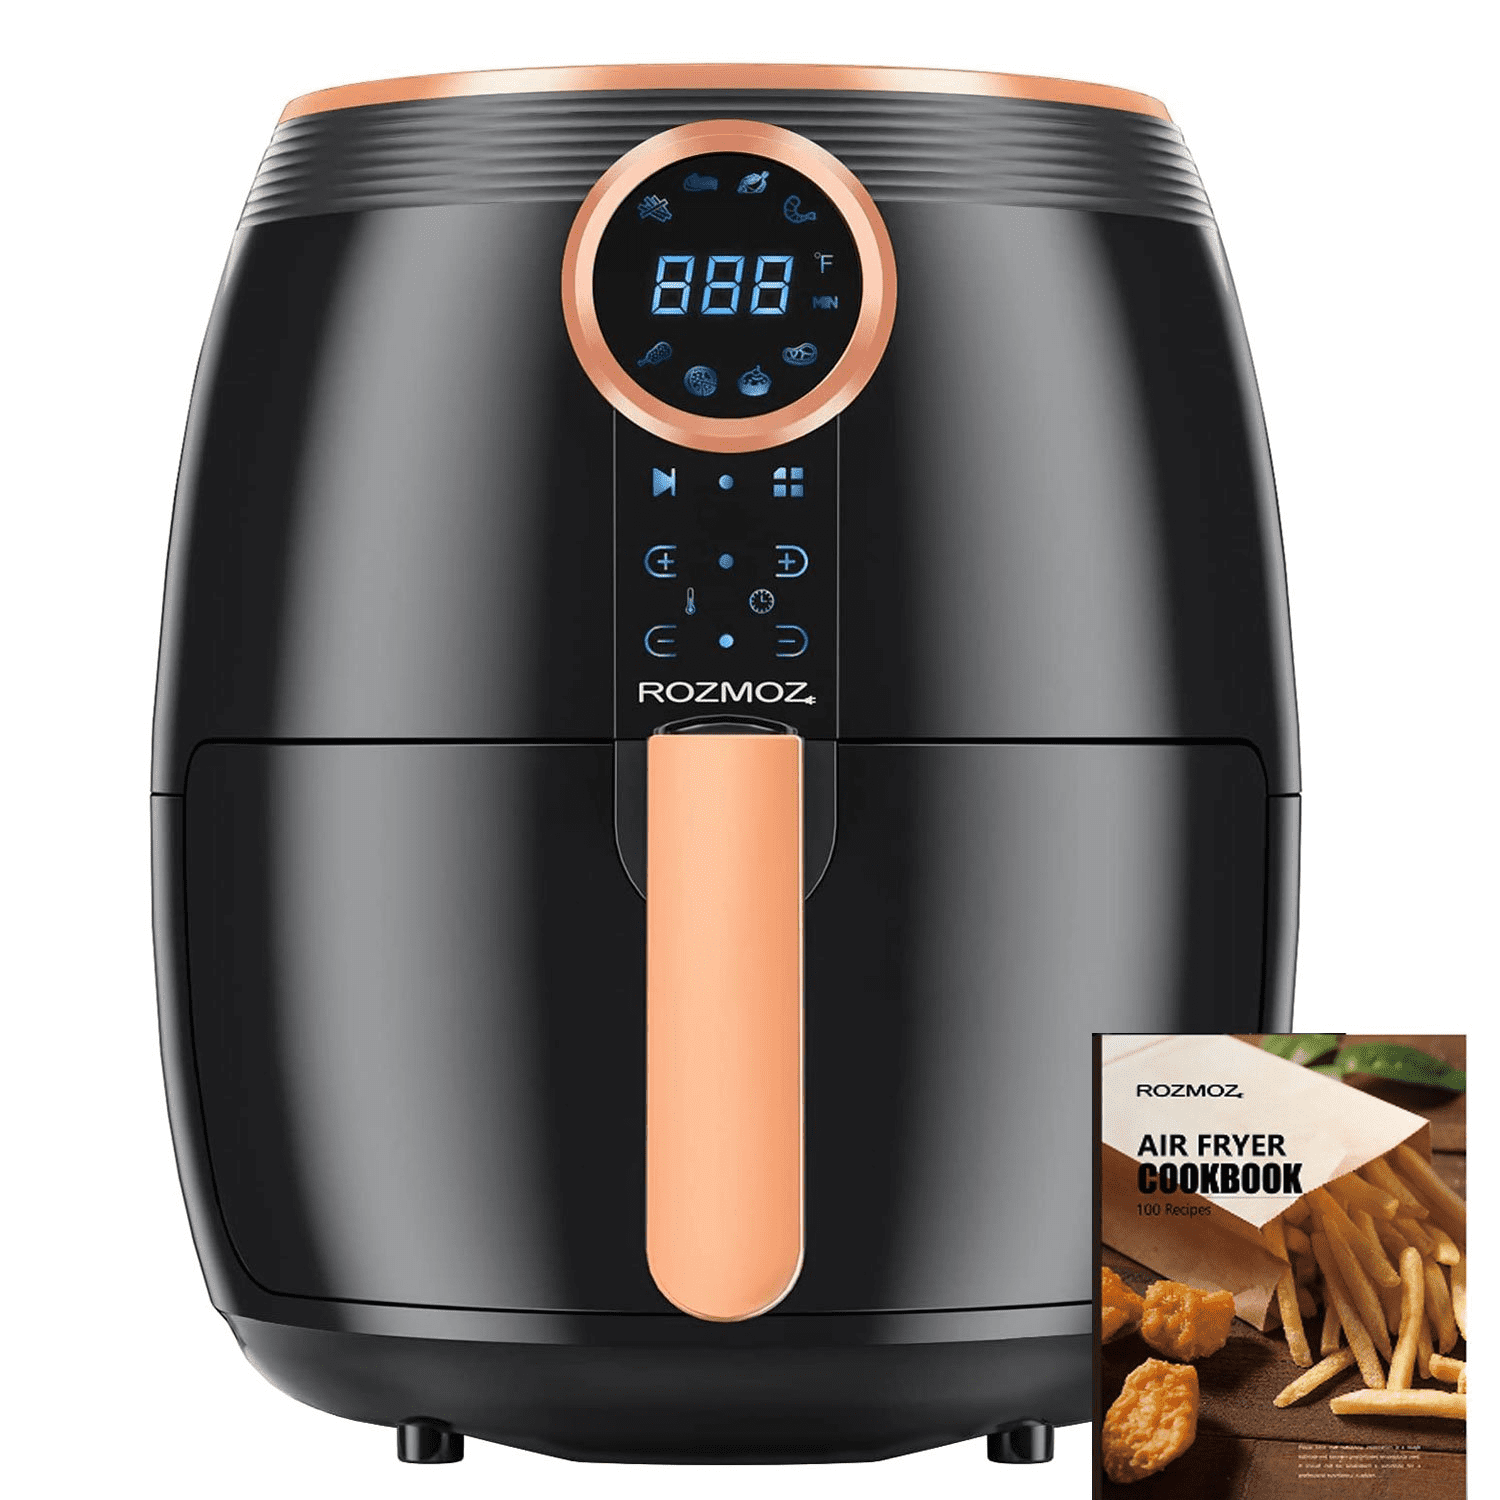 Air Fryer, 5.5 L, Airfryer Compact Oilless Small Oven, Quiet, Fit for 1-4  People